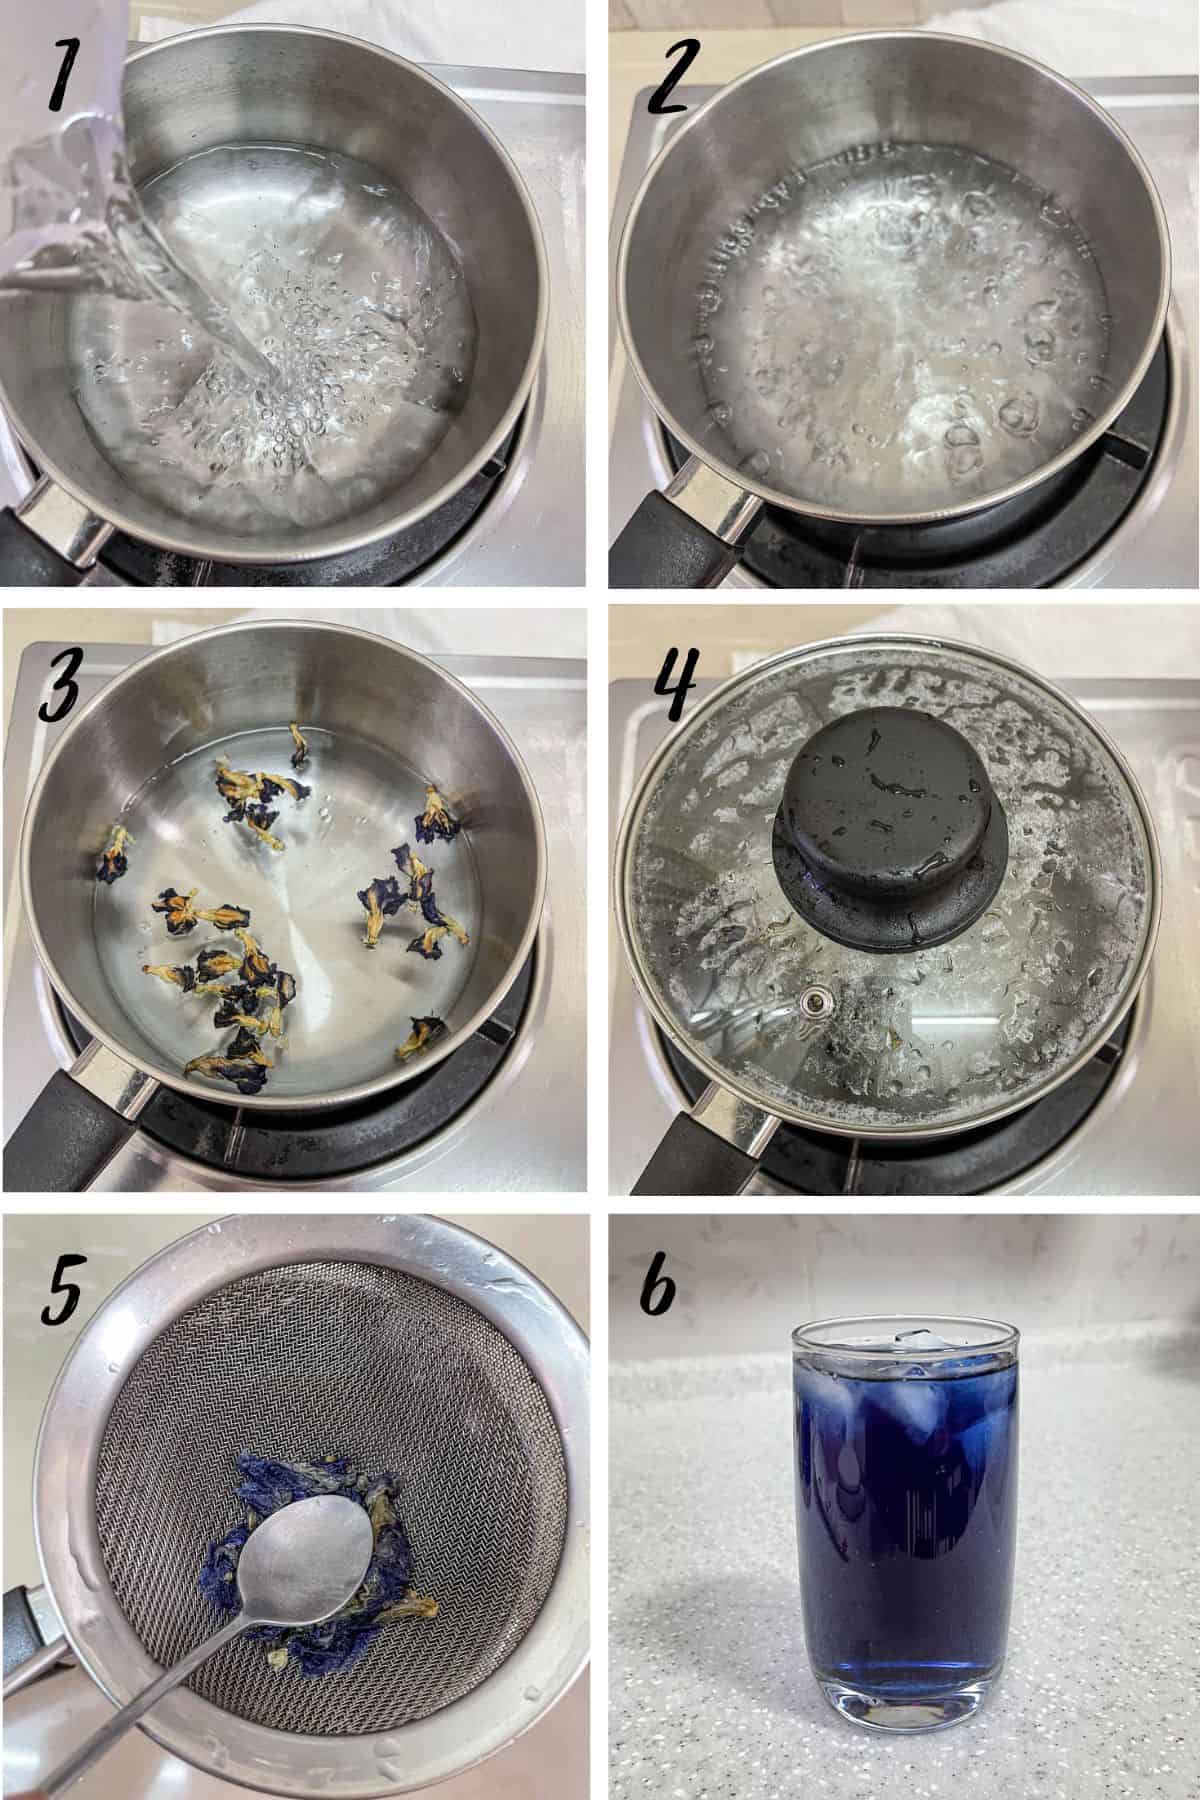 A poster of 6 images showing how to brew butterfly pea tea.